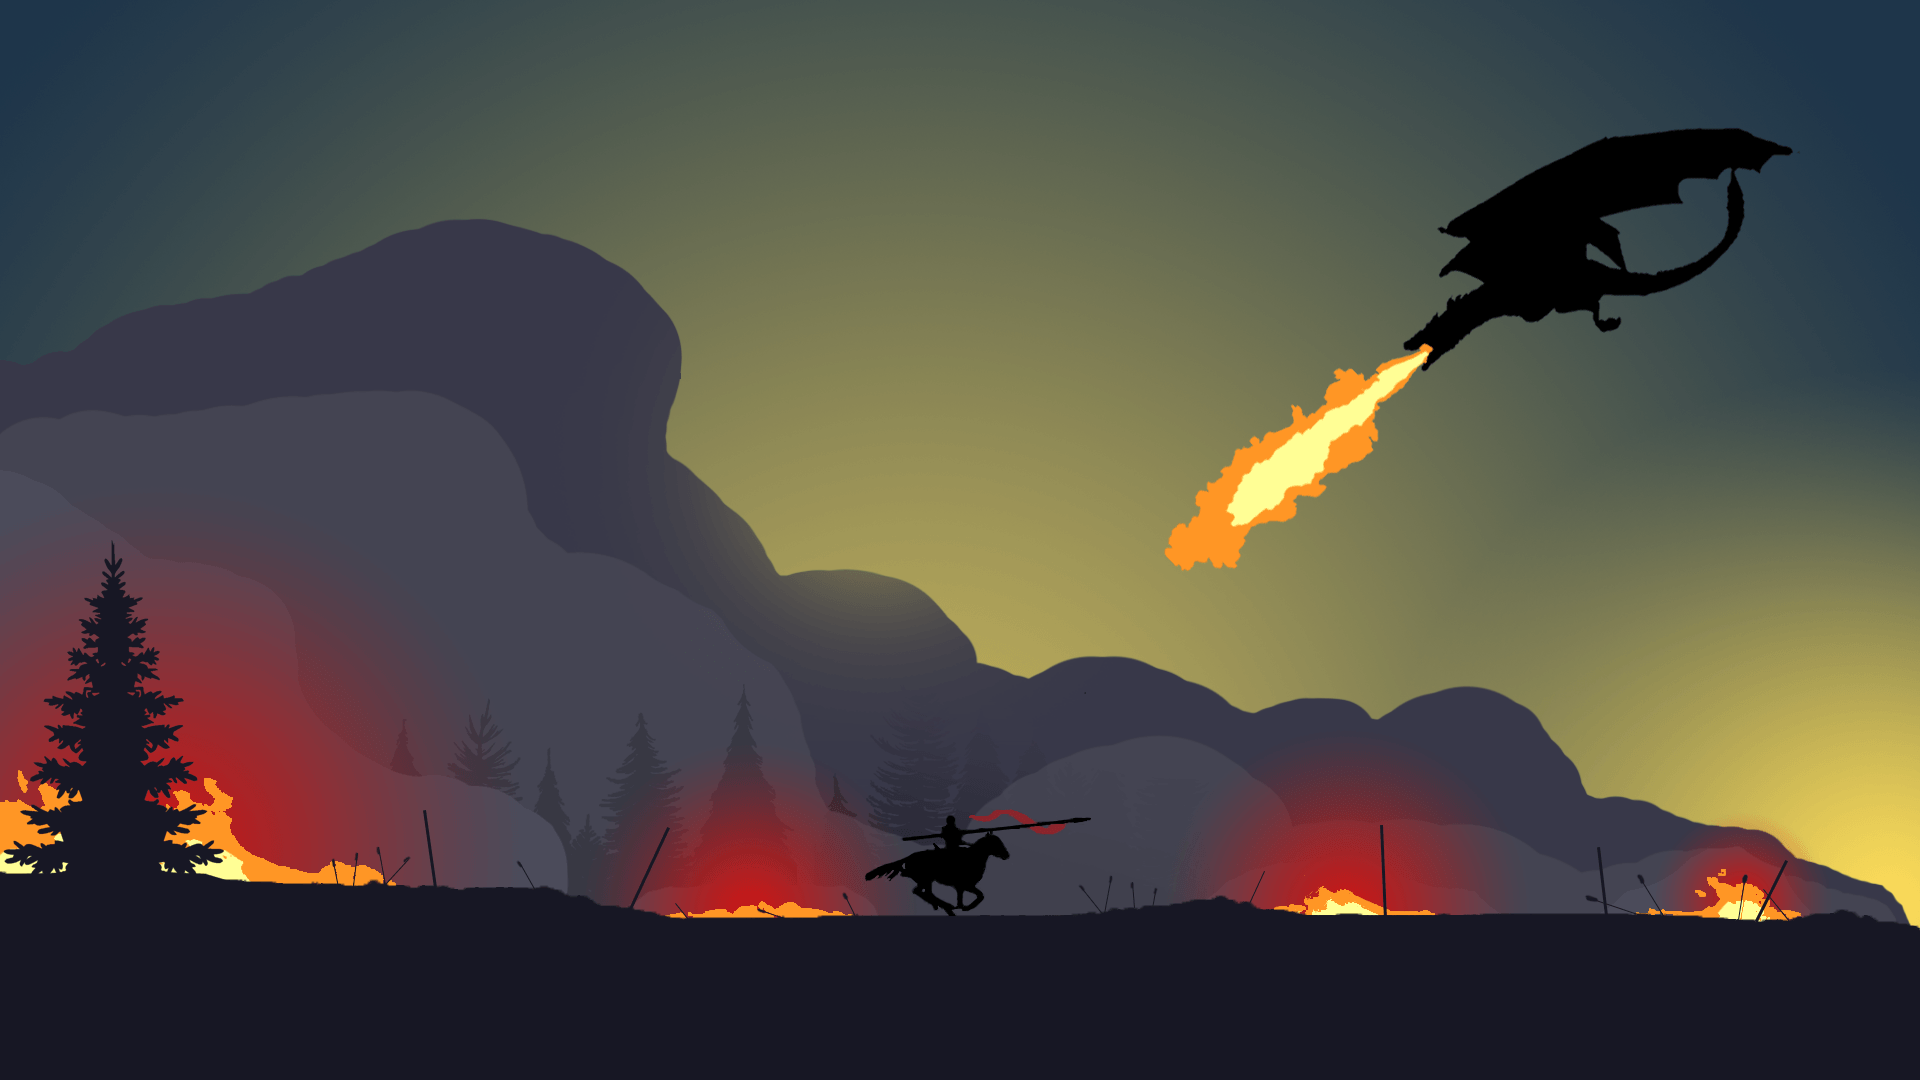 A Flat Wallpaper I Made Inspired By Field Of Fire - Game Of Thrones Flat - HD Wallpaper 